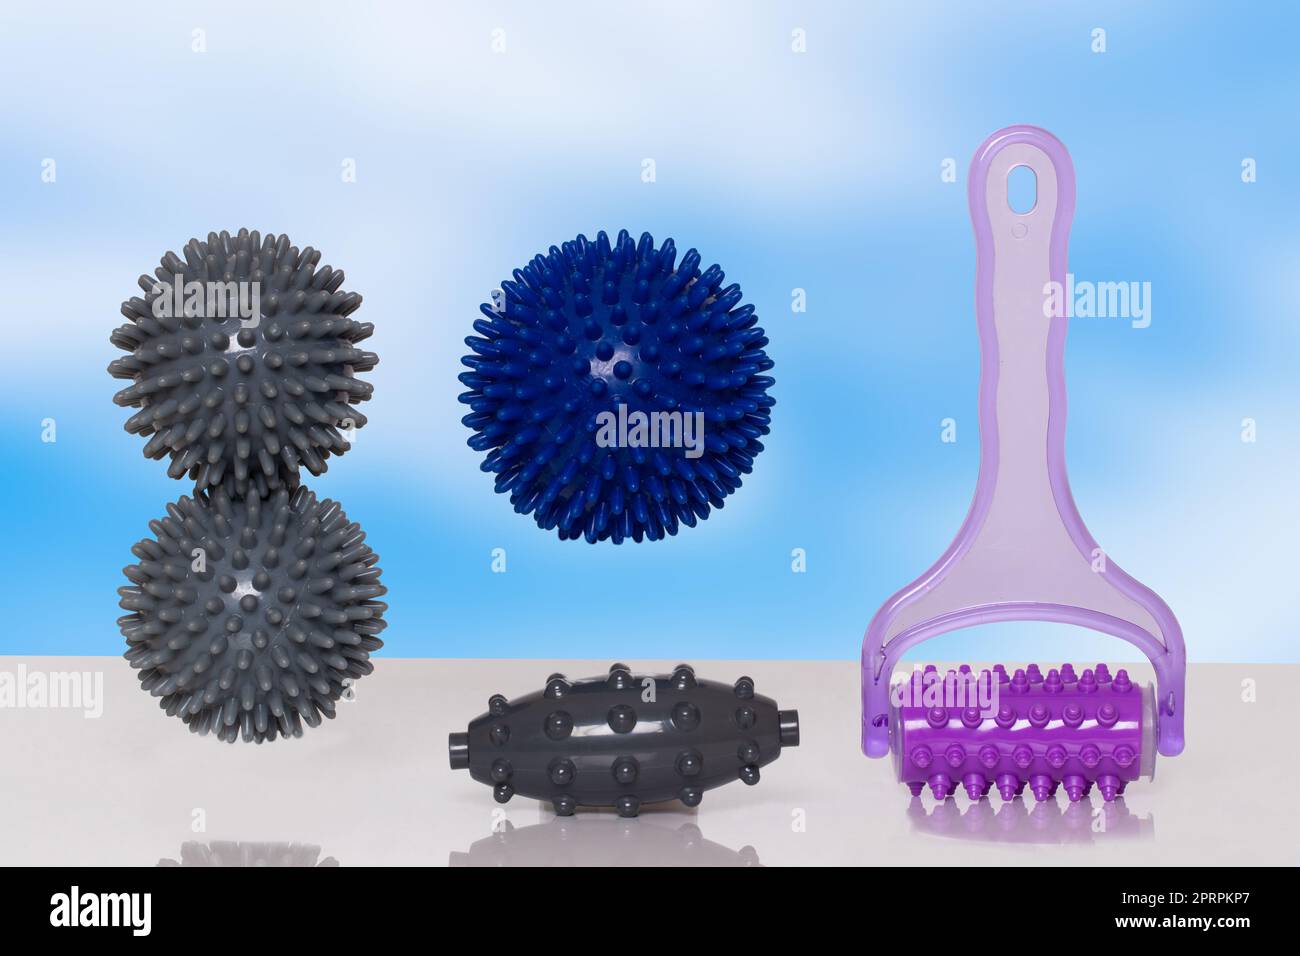 Closeup of various therapy and fitness equipment, such as massage balls or hedgehog balls and roller for health therapie on table over abstract background. Stock Photo